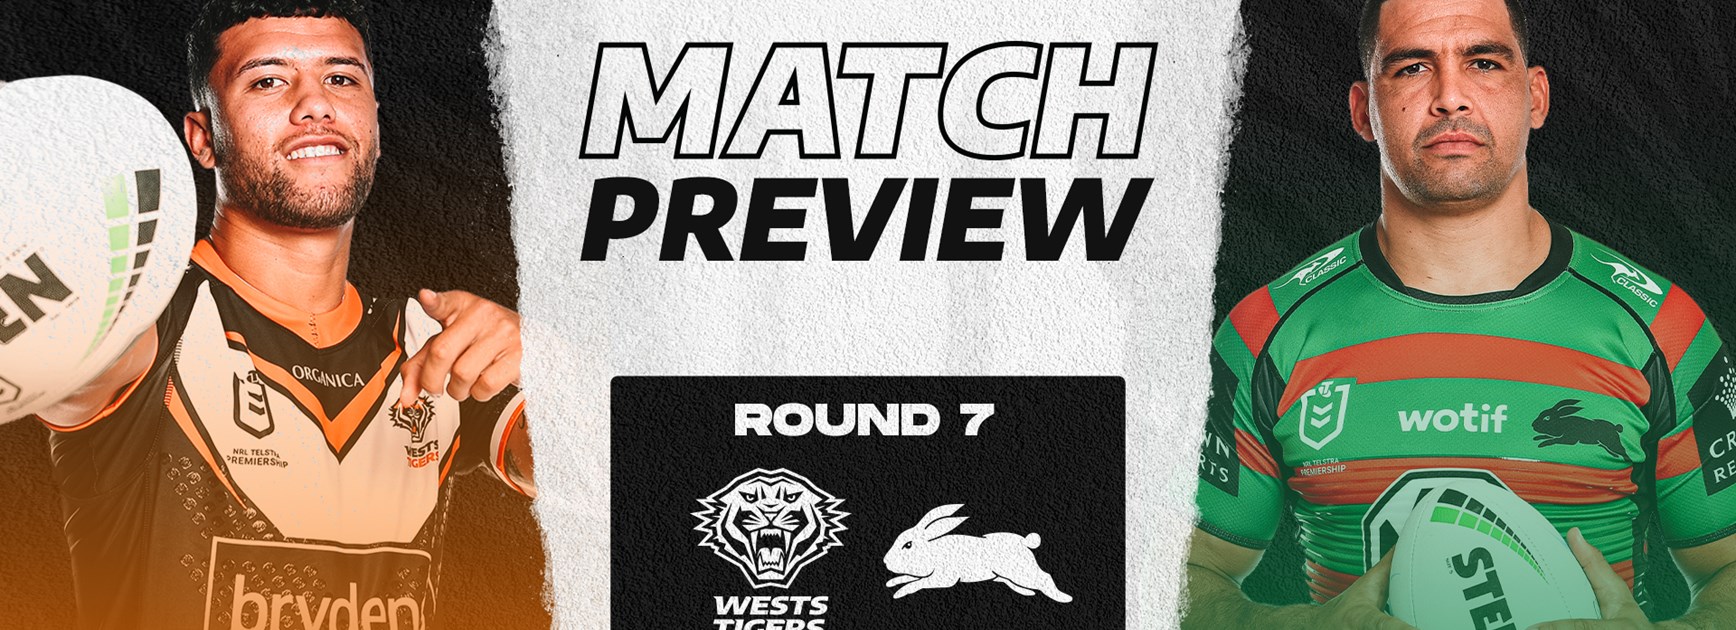 Match Preview: Round 7 vs Rabbitohs